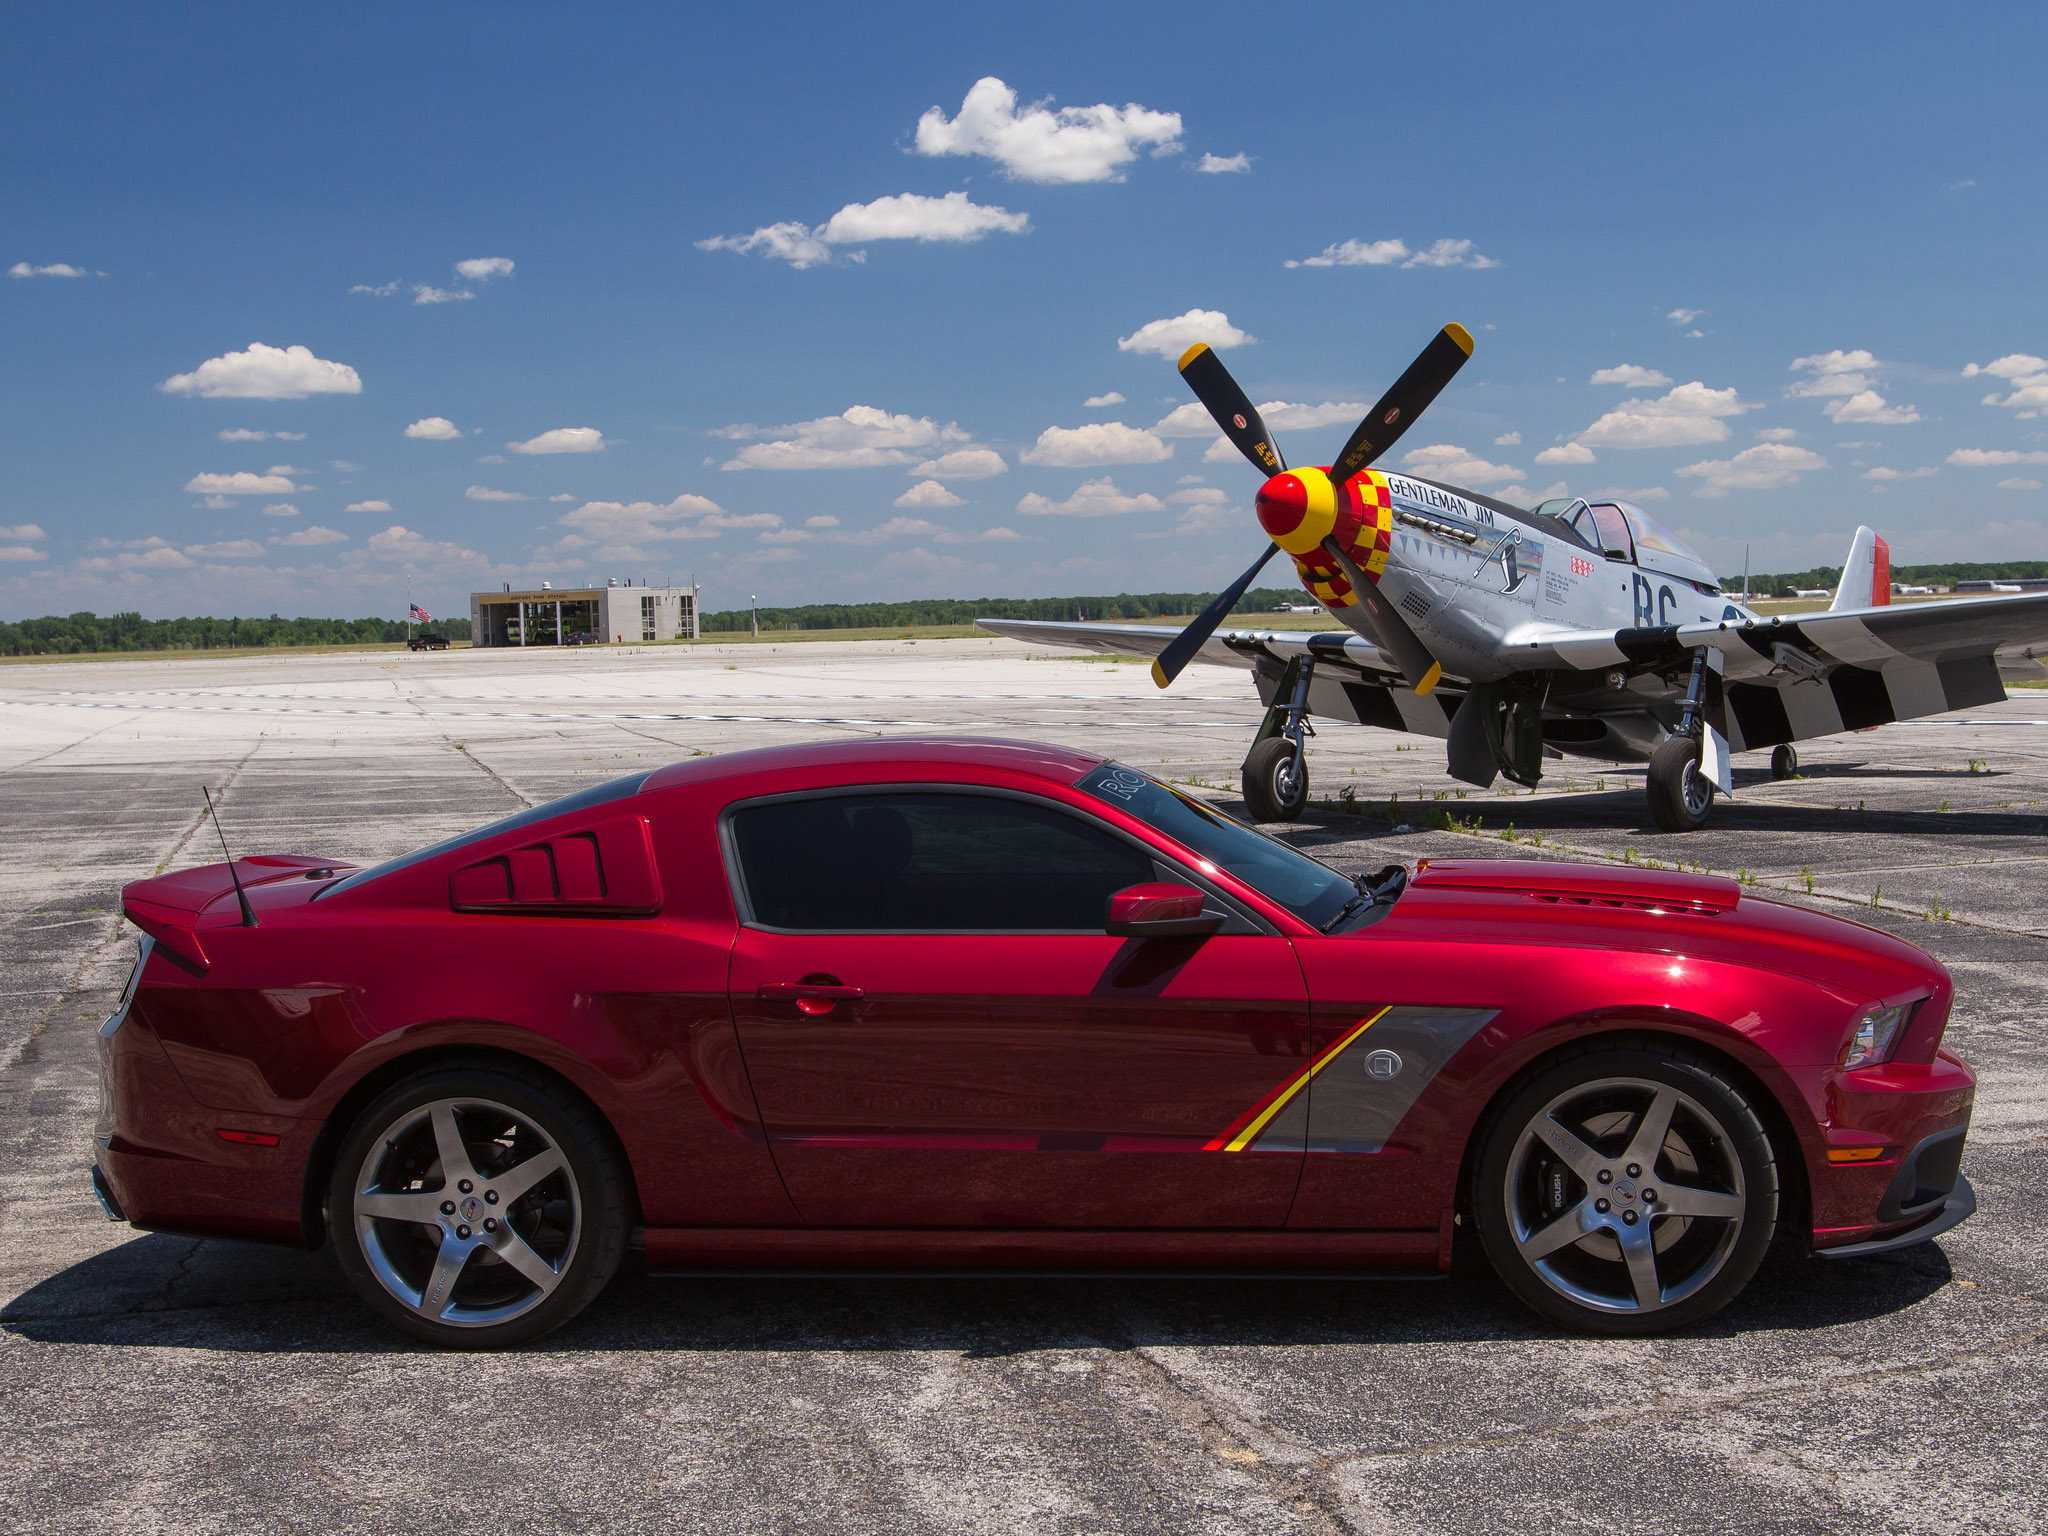 2013, Roush, Ford, Mustang, Stage 3, Muscle, Supercar, Supercars, Airplane, Plane, Retro, Military, Gf Wallpaper